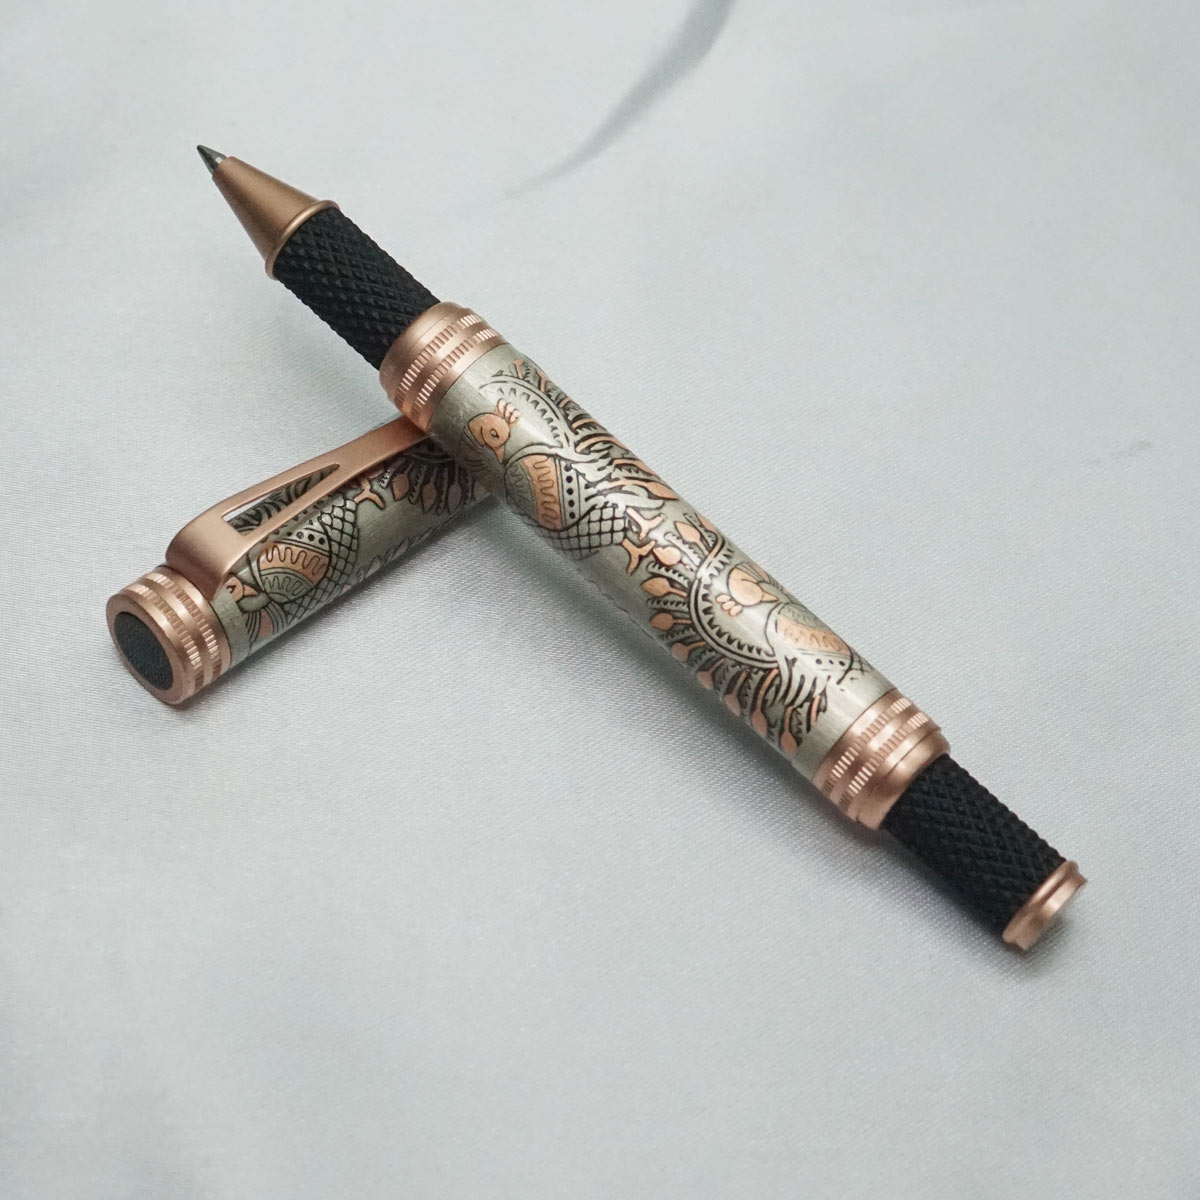 penhouse.in Peacock Deisgn Body Roller Ball Pen with Rose Gold Trim SKU 21829